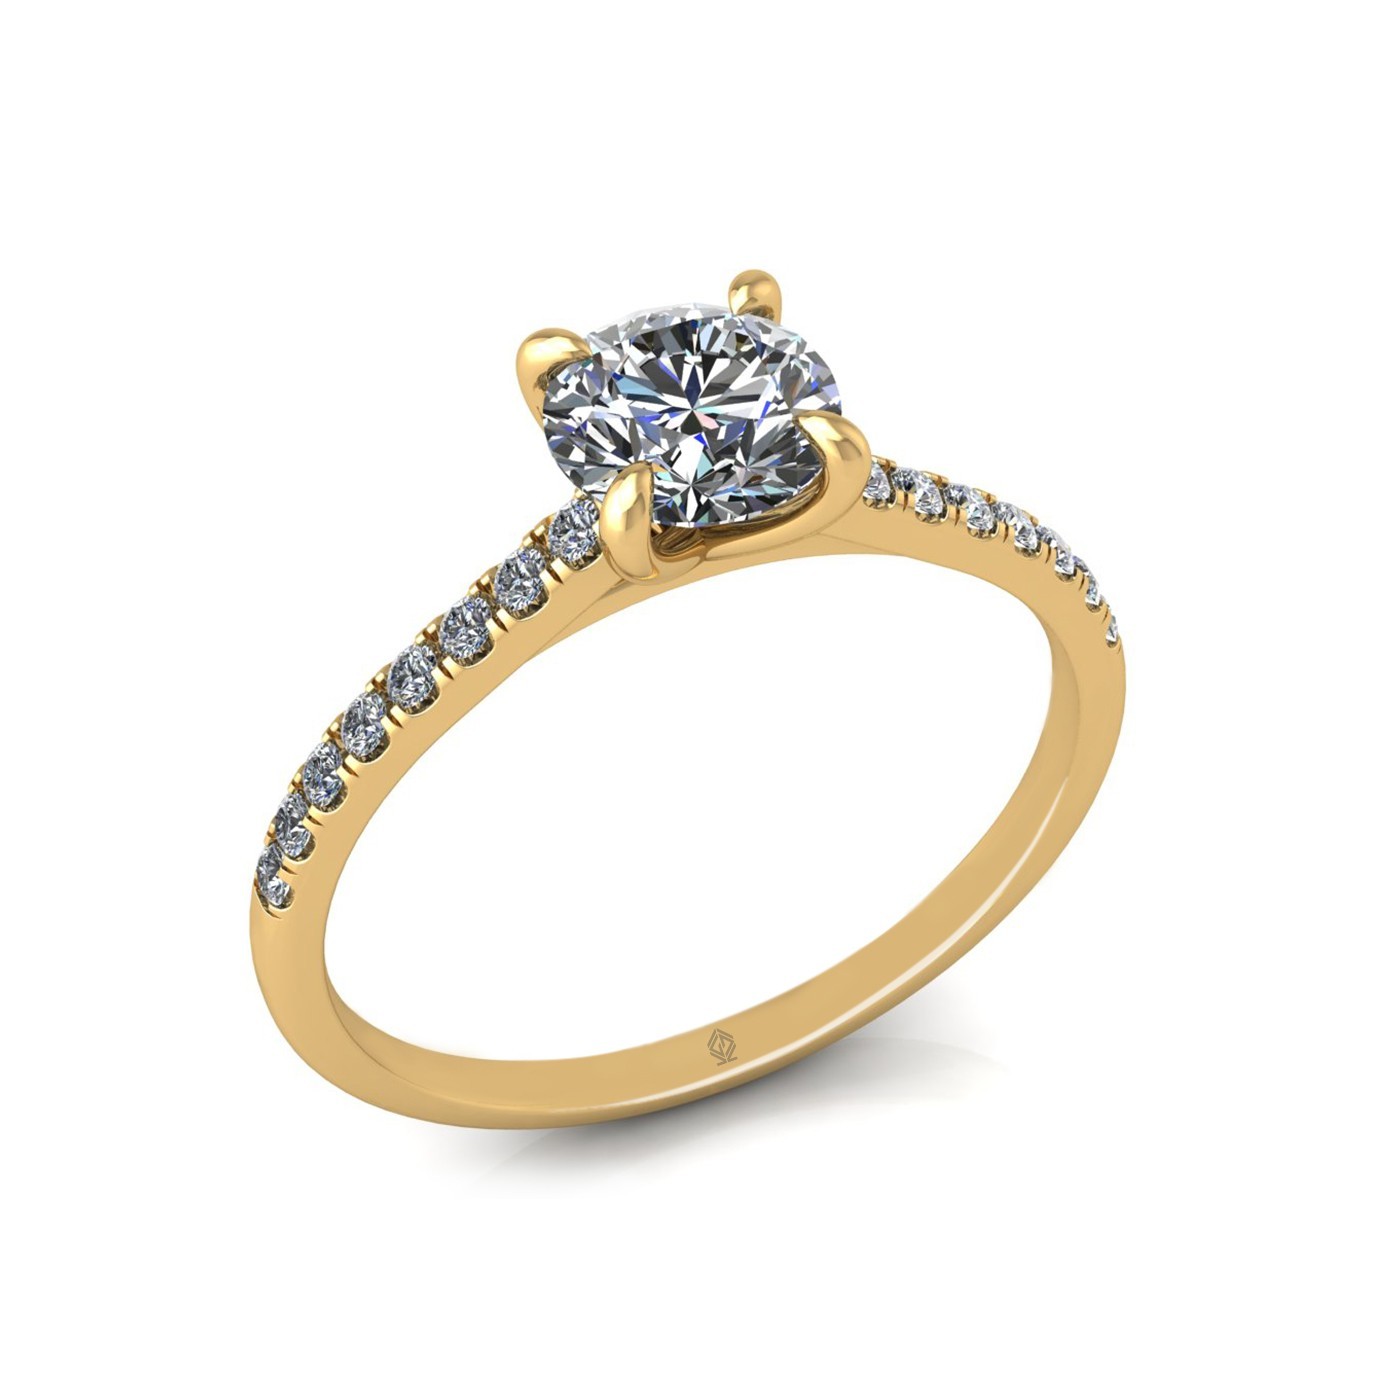 18K YELLOW GOLD 4 PRONGS ROUND CUT DIAMOND ENGAGEMENT RING WITH WHISPER THIN PAVÉ SET BAND